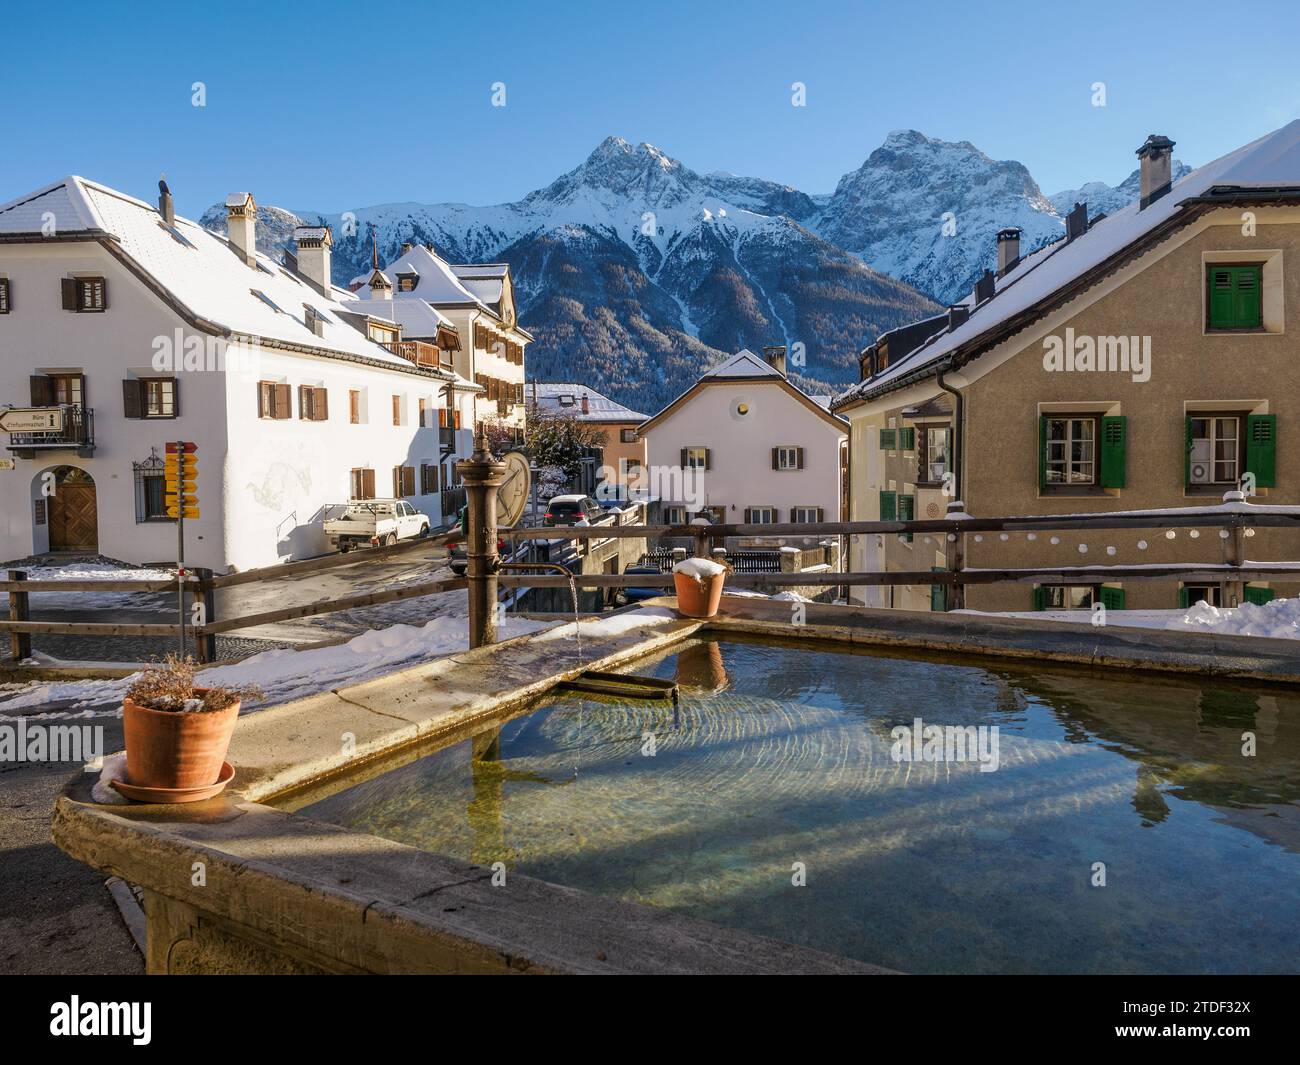 A plaza and fountain in the Alpine village of Sent in winter, Sent, Switzerland, Europe Stock Photo